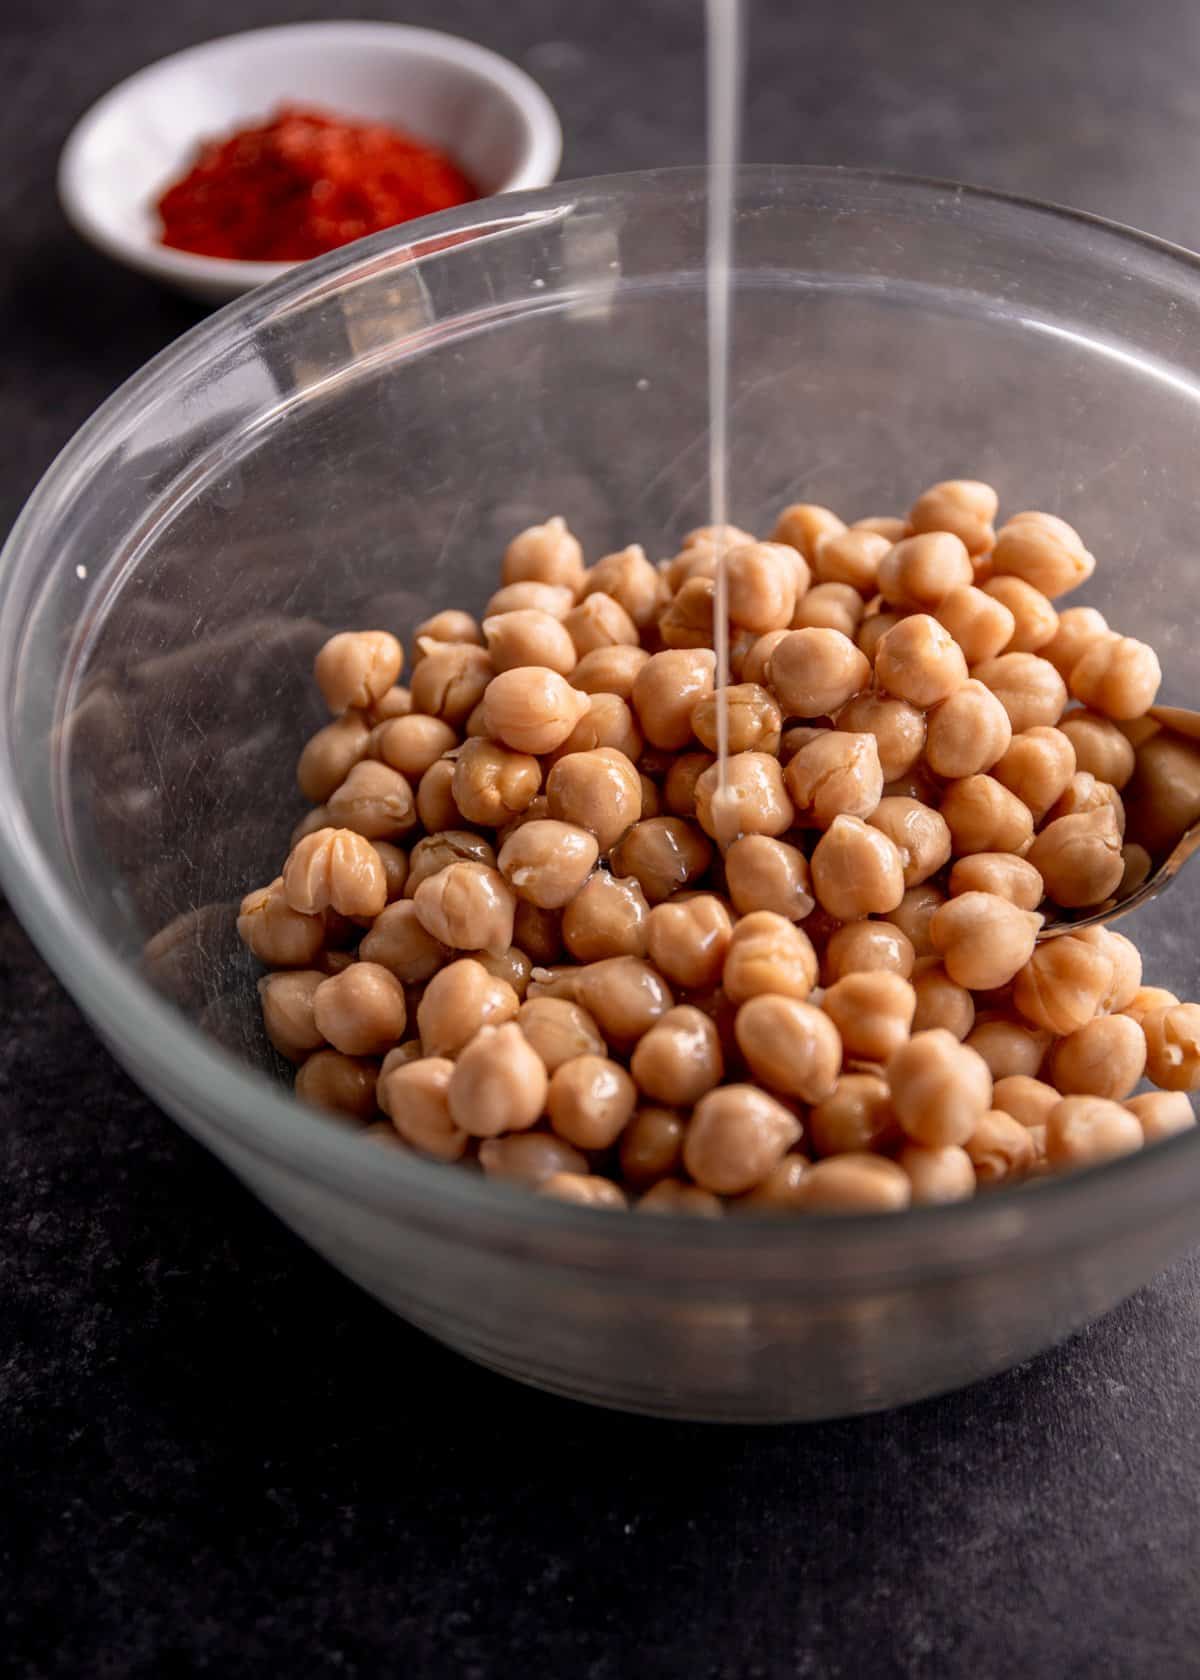 drizzling oil over chickpeas in a glass bowl